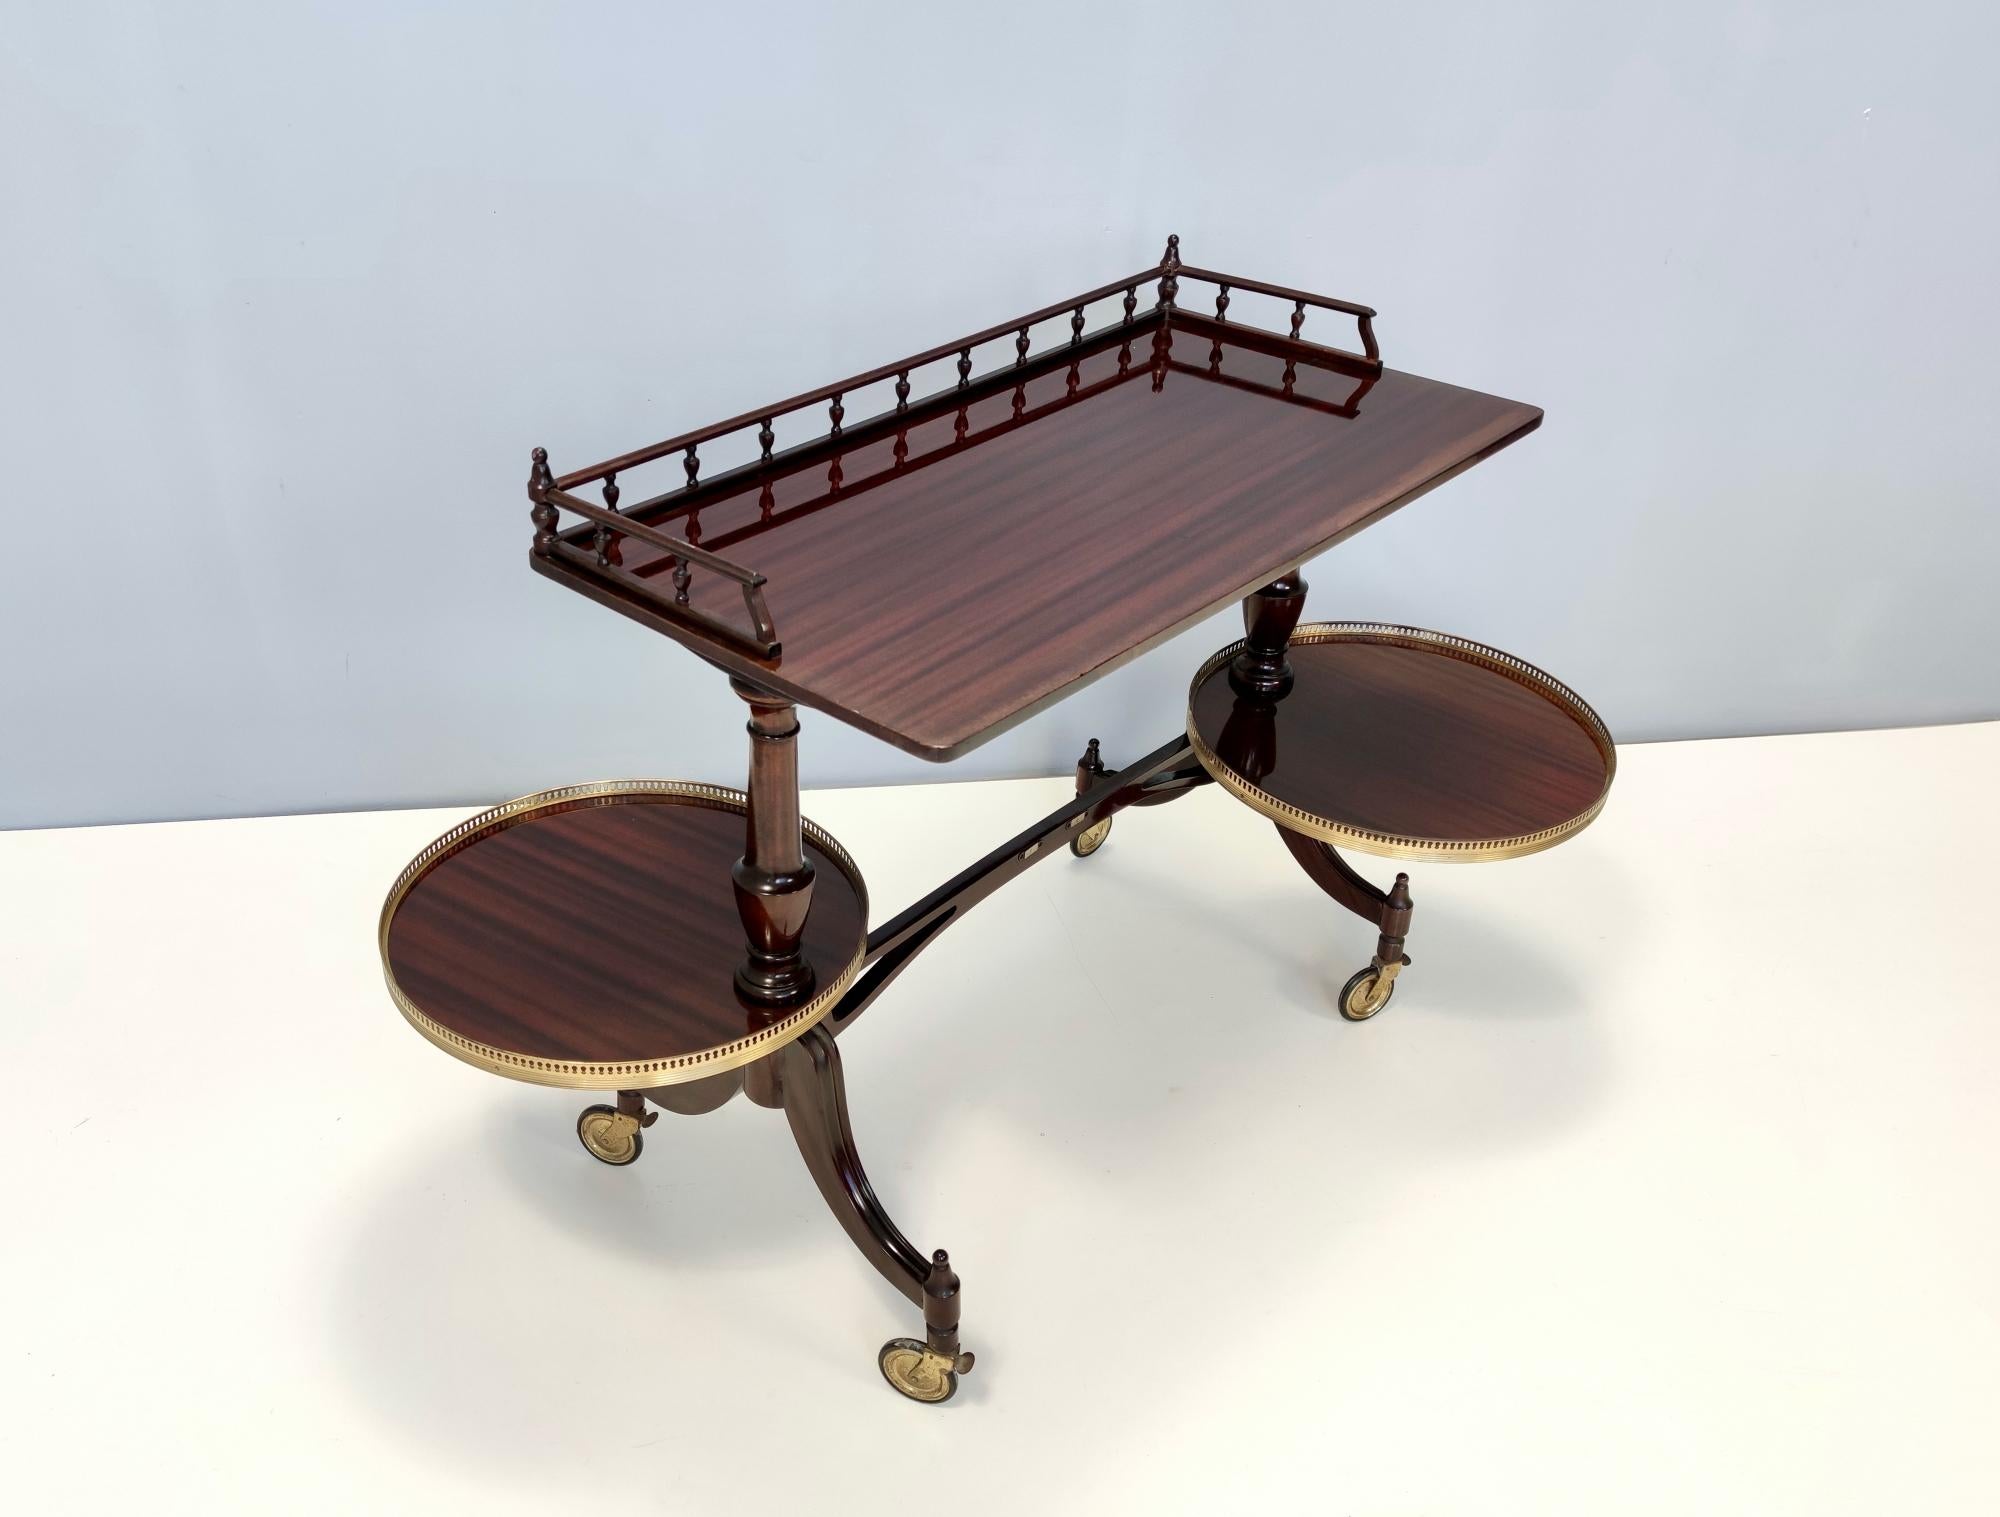 Made in Italy, 1950s.
This serving cart / console table features a walnut frame with brass details and casters.
It is a vintage piece therefore it might show slight traces of use, but it can be considered as in excellent original